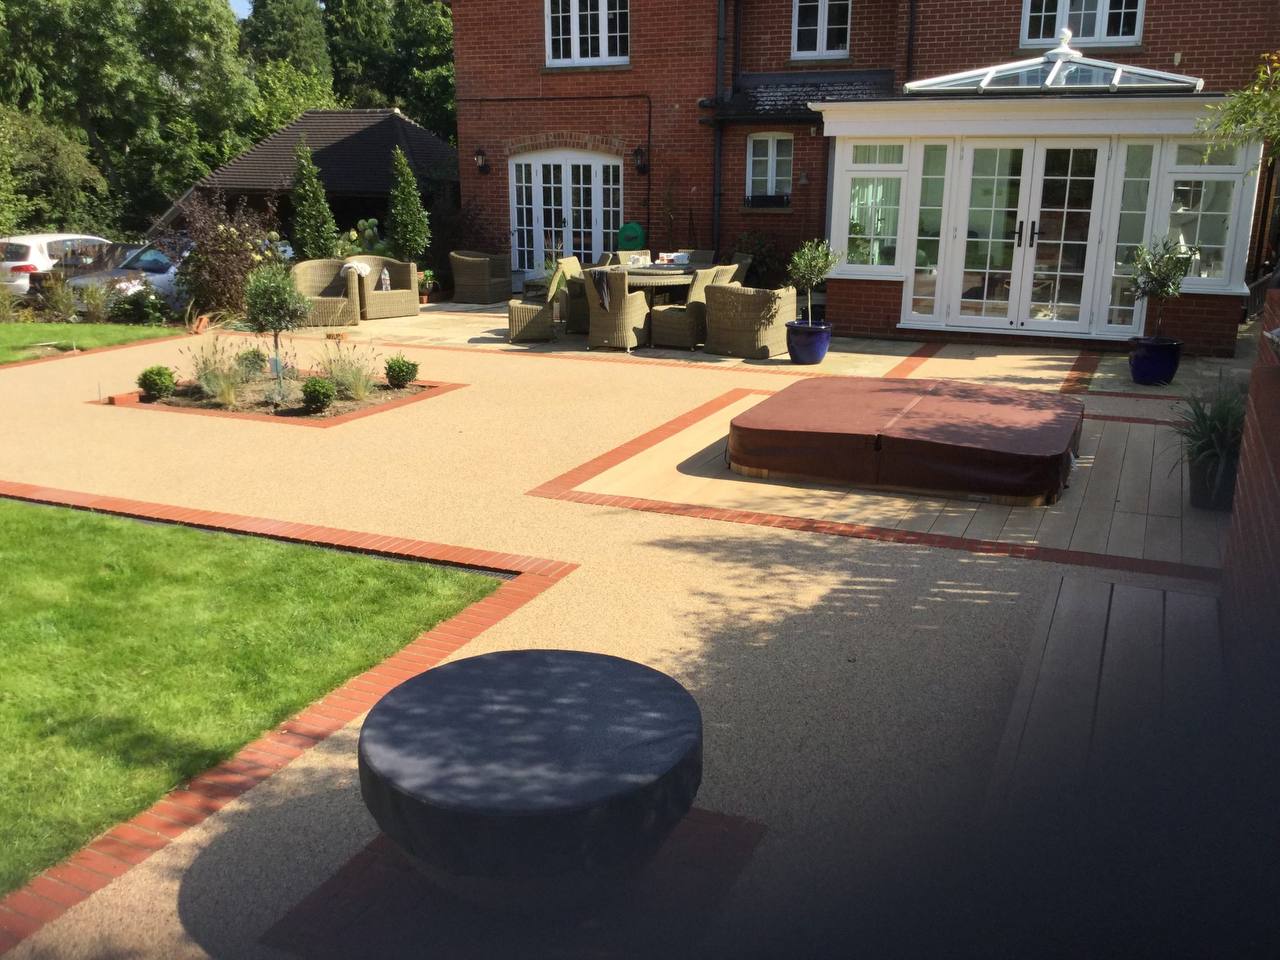 This is a photo of a Resin bound patio carried out in Stockport. All works done by Stockport Resin Driveways Solutions